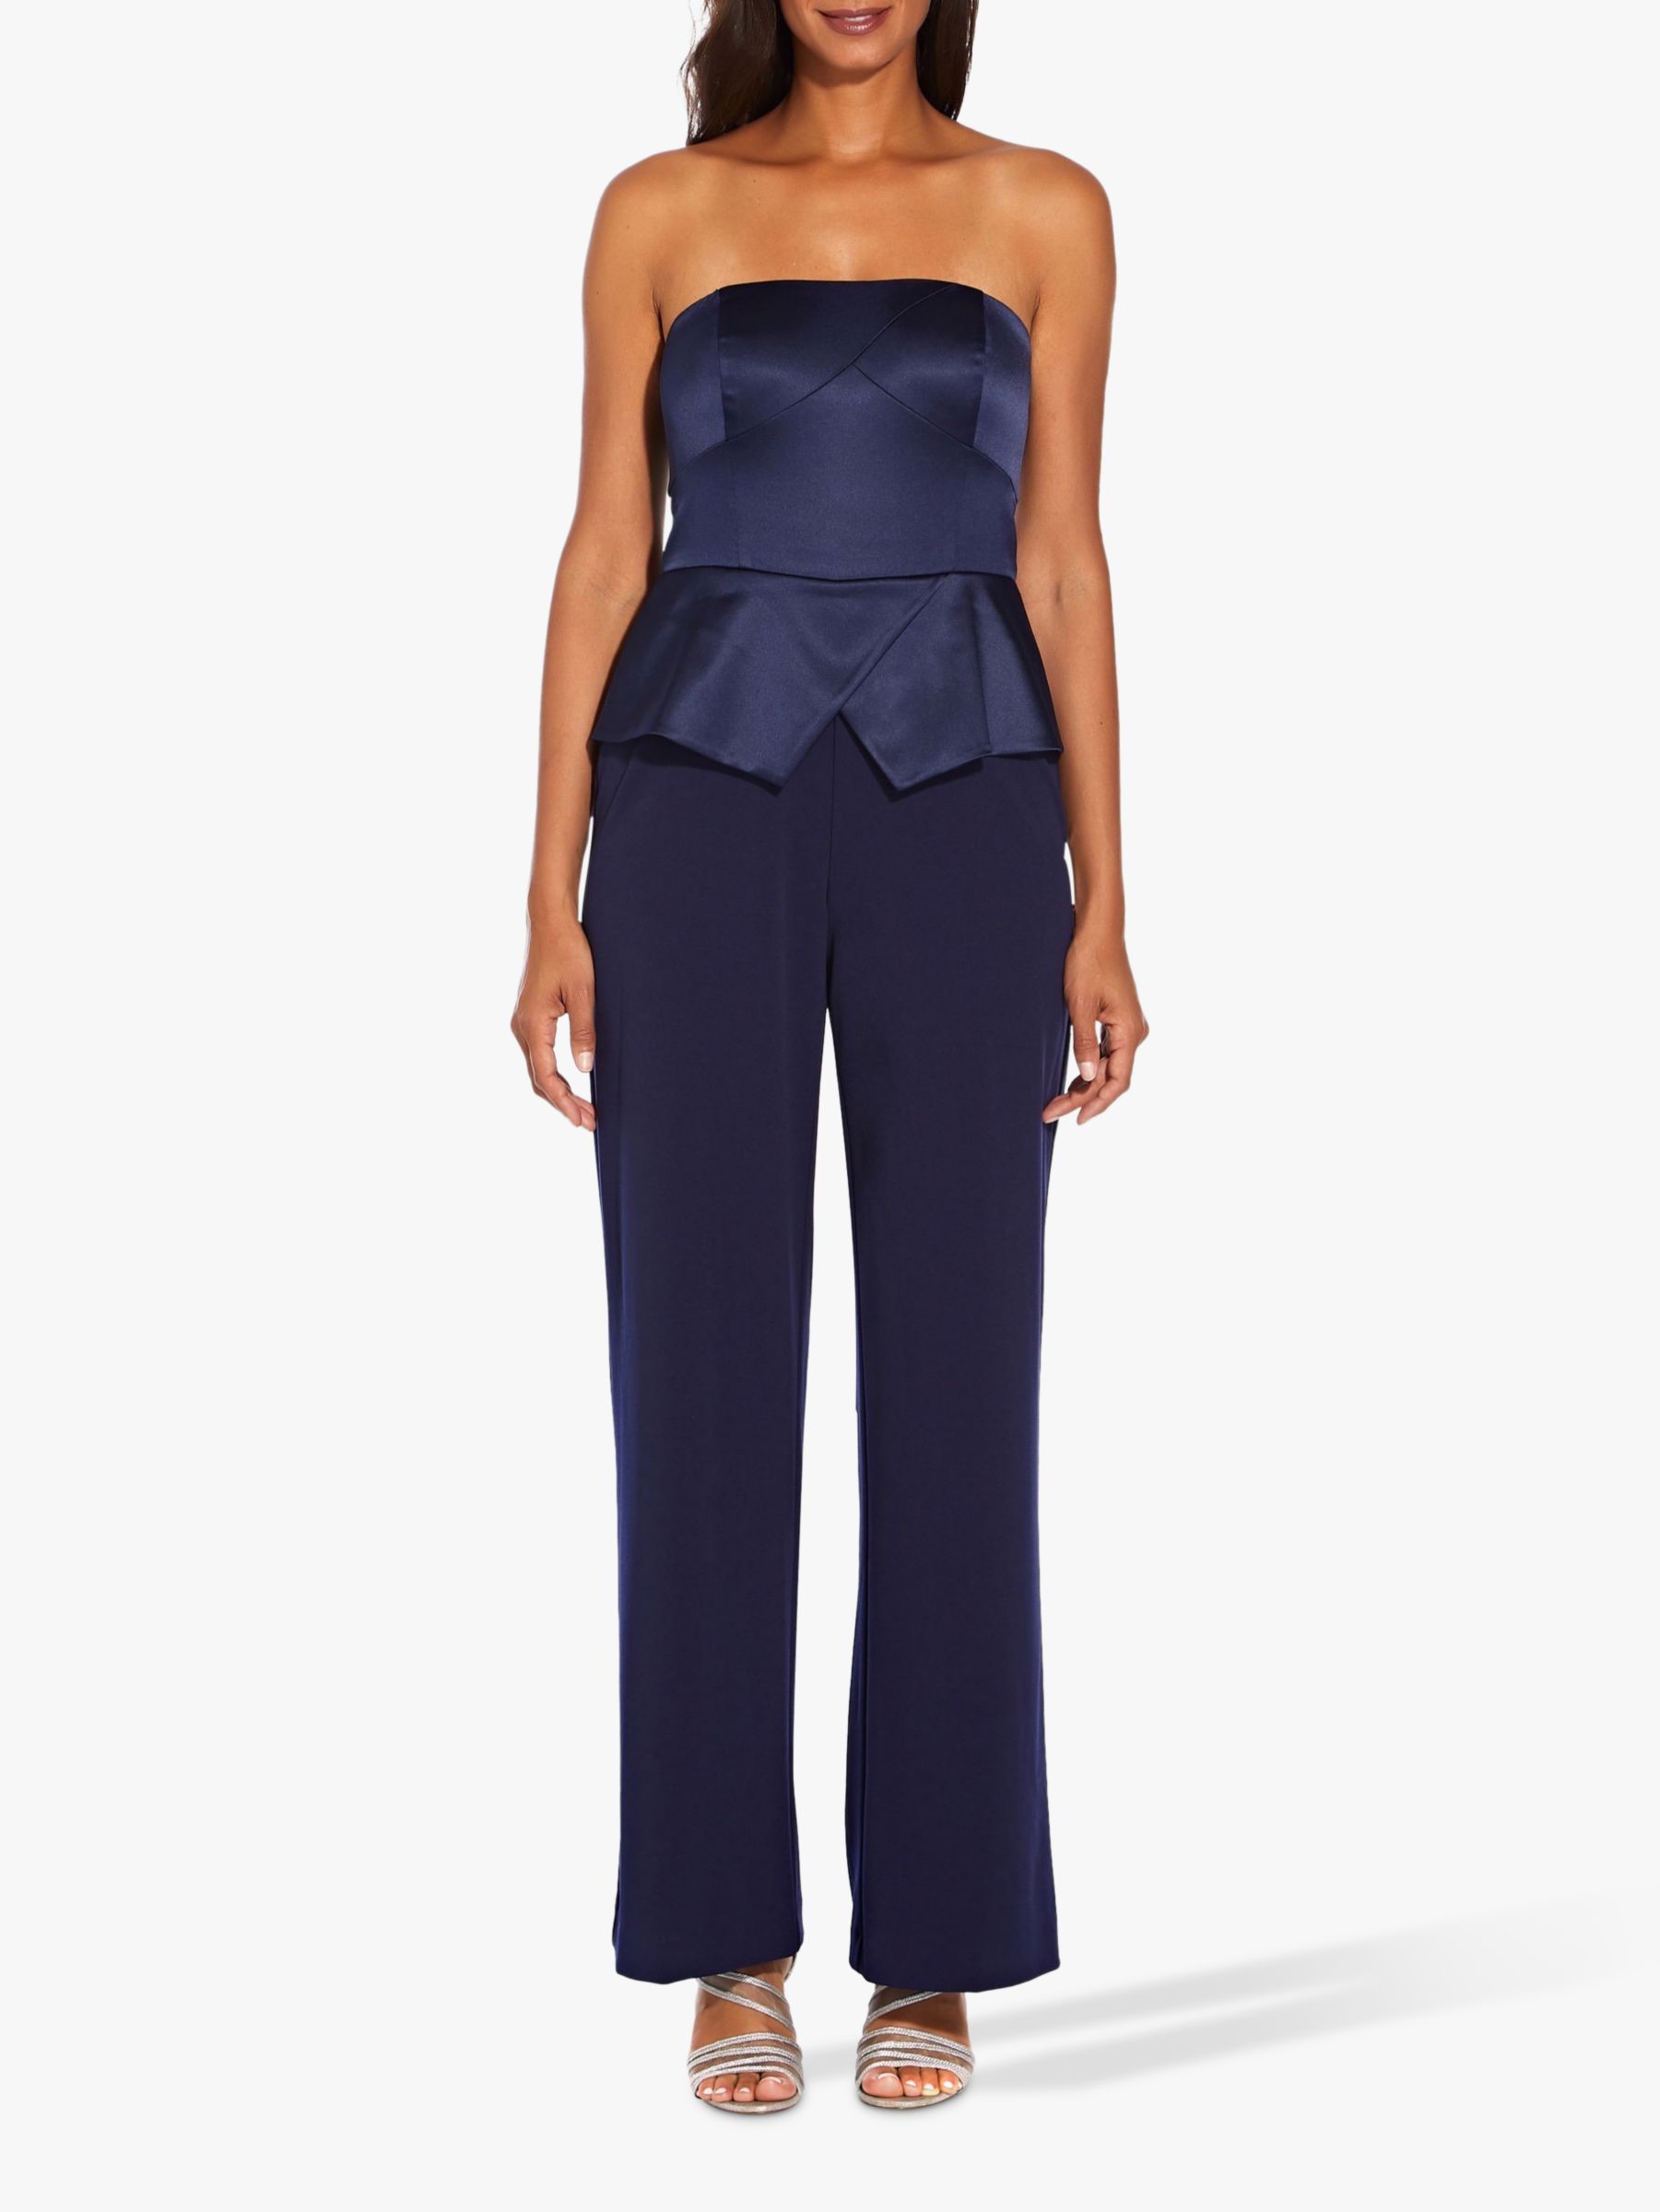 Adrianna Papell Strapless Jumpsuit, Navy